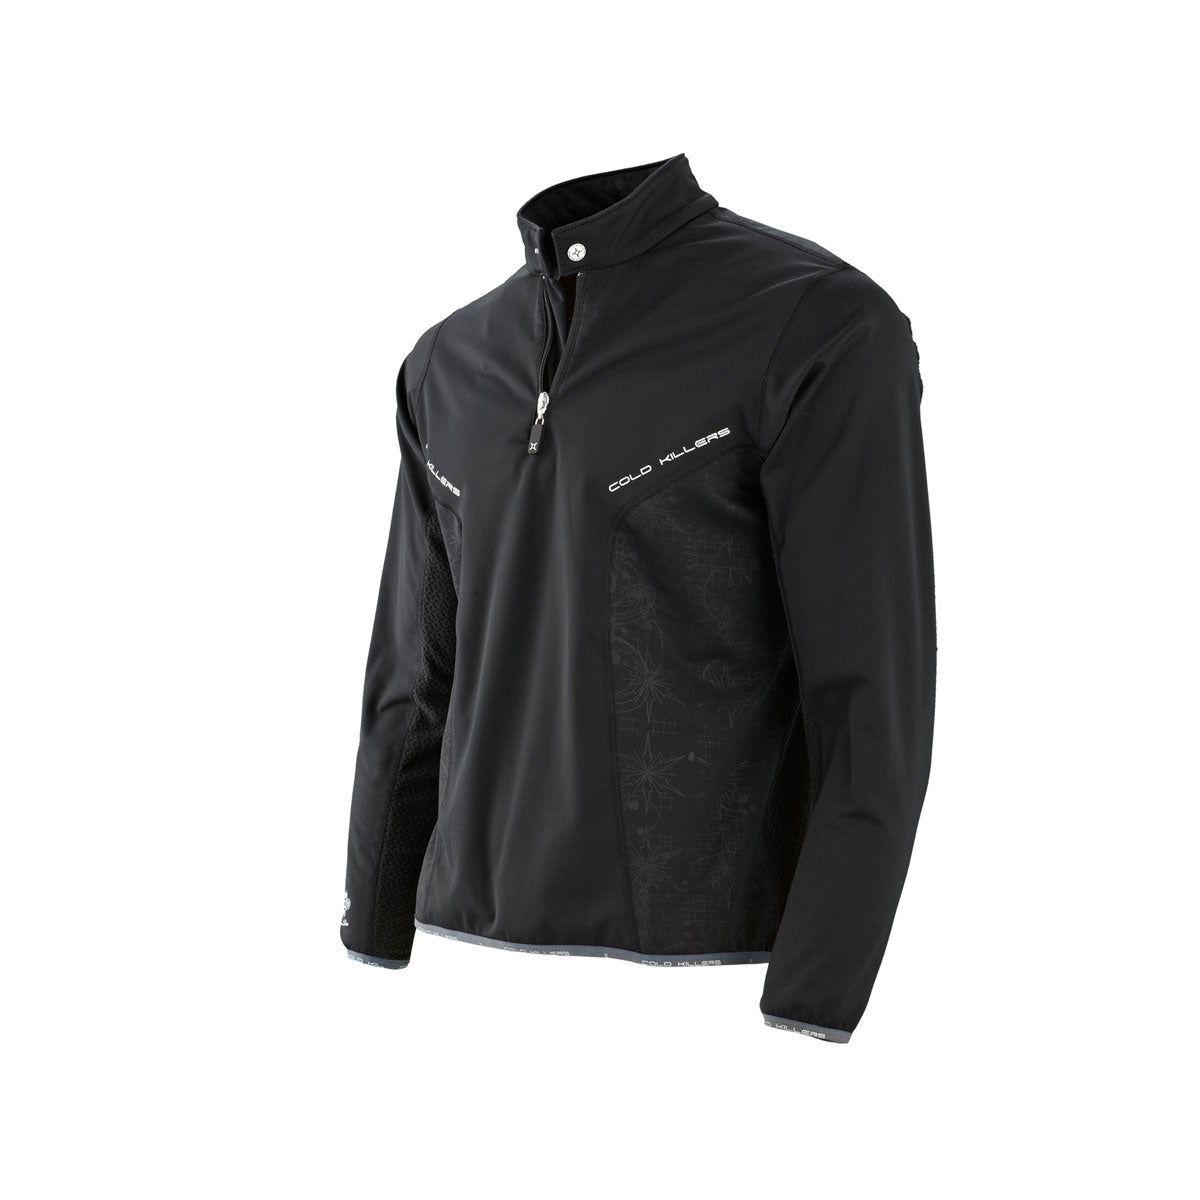 Knox: Cold Killers CORE Warm Sport Top for Men - Outdoor Travel Gear 1